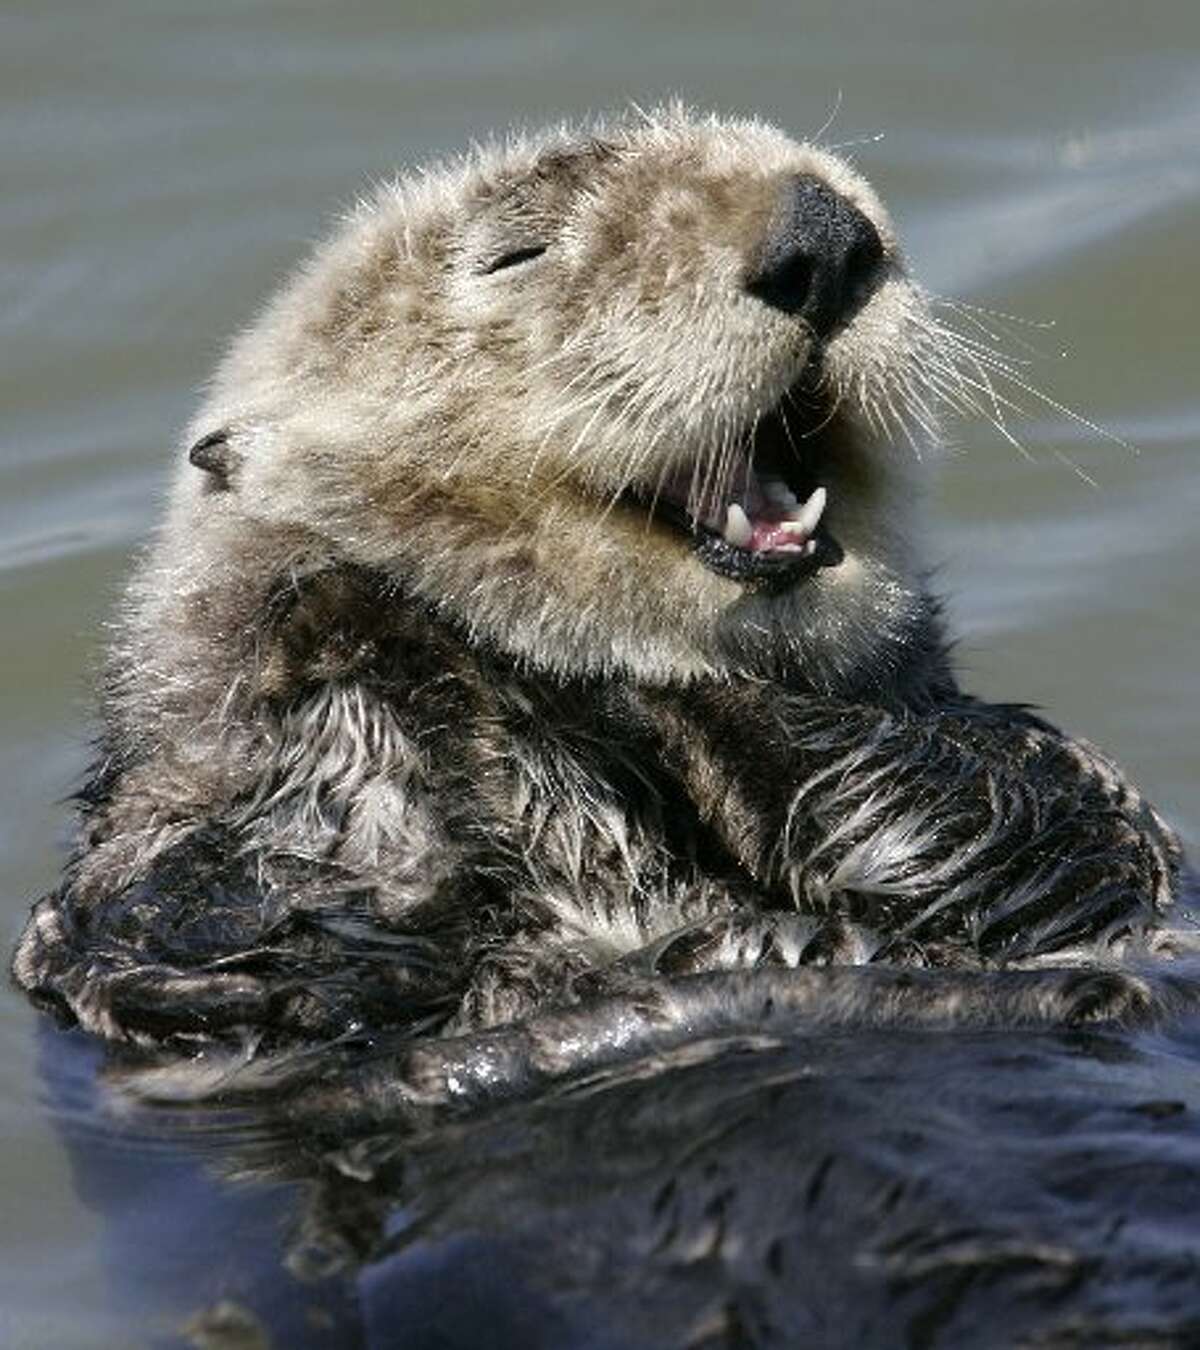 In this May 8, 2007 file photo, an Southern sea otter cleans itself in the water in Monterey, Calif. State Department of Fish and Wildlife officials say a sea otter was found skinned on a beach in San Luis Obispo County. 